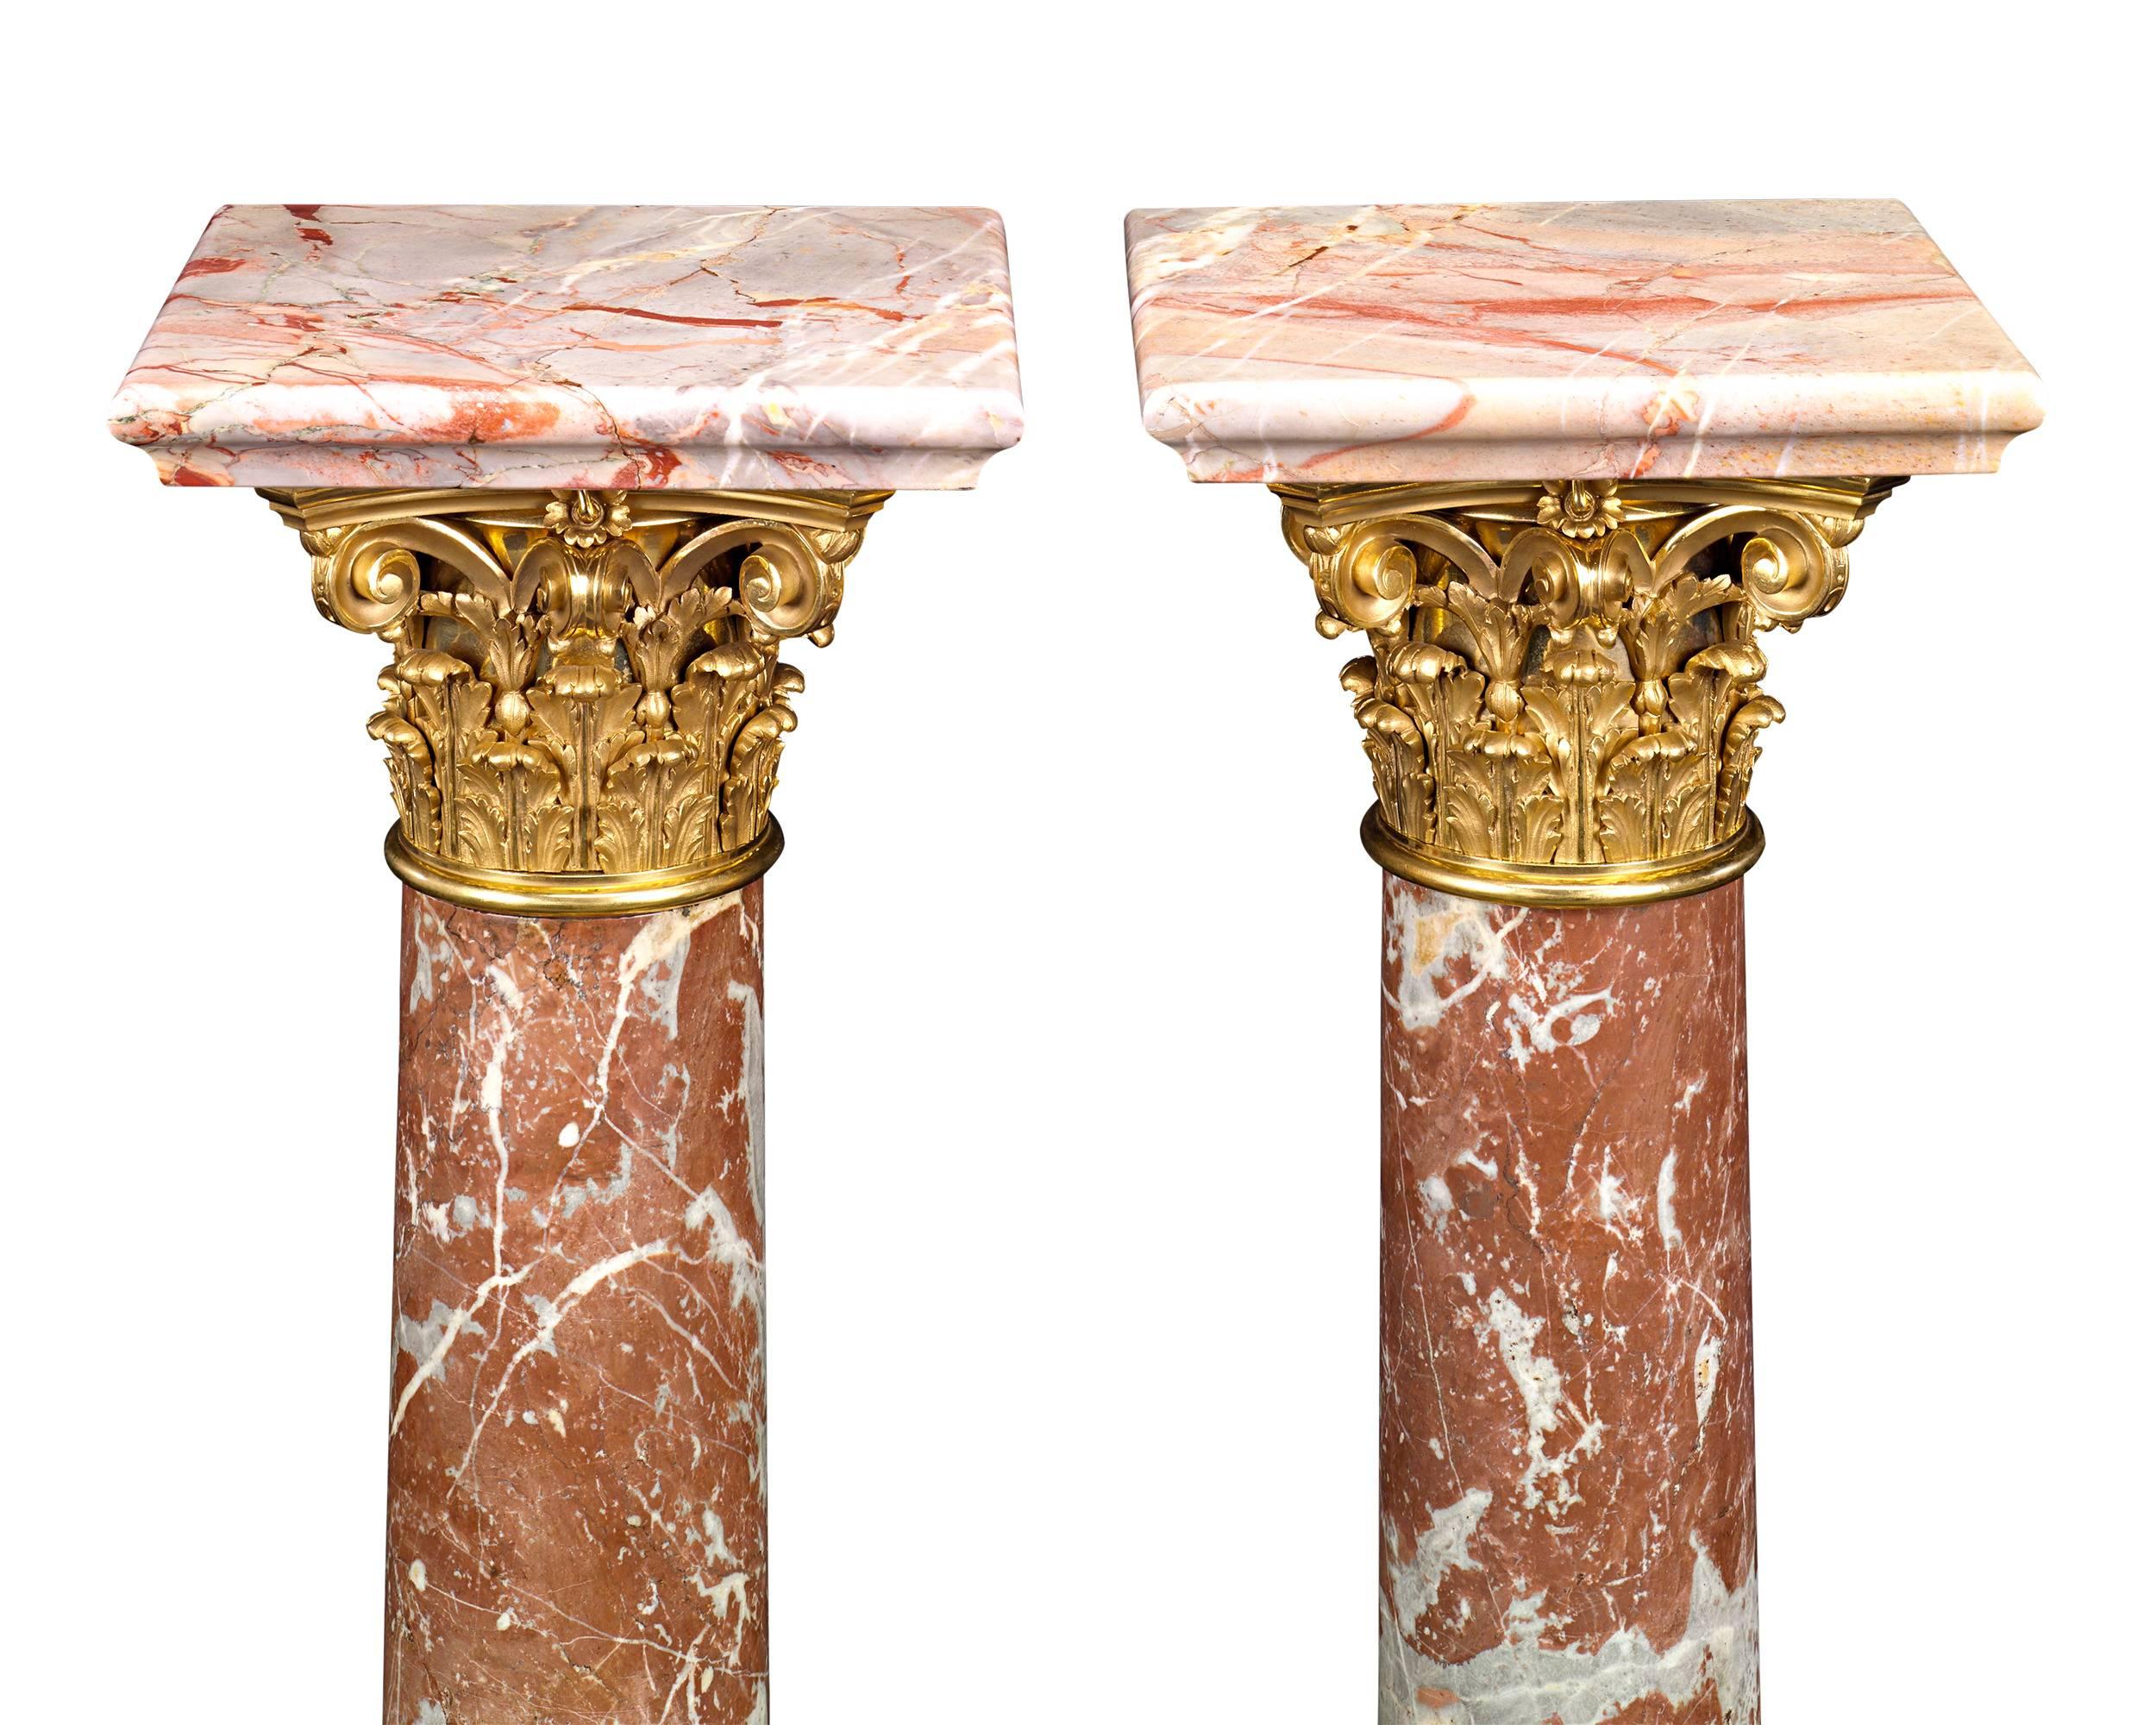 Four complementary varieties of marble were selected to create this stately pair of French Louis XVI-style pedestals. Crafted in the neoclassical form of Corinthian columns, the pedestals bring together rare specimens of rouge royale and rouge